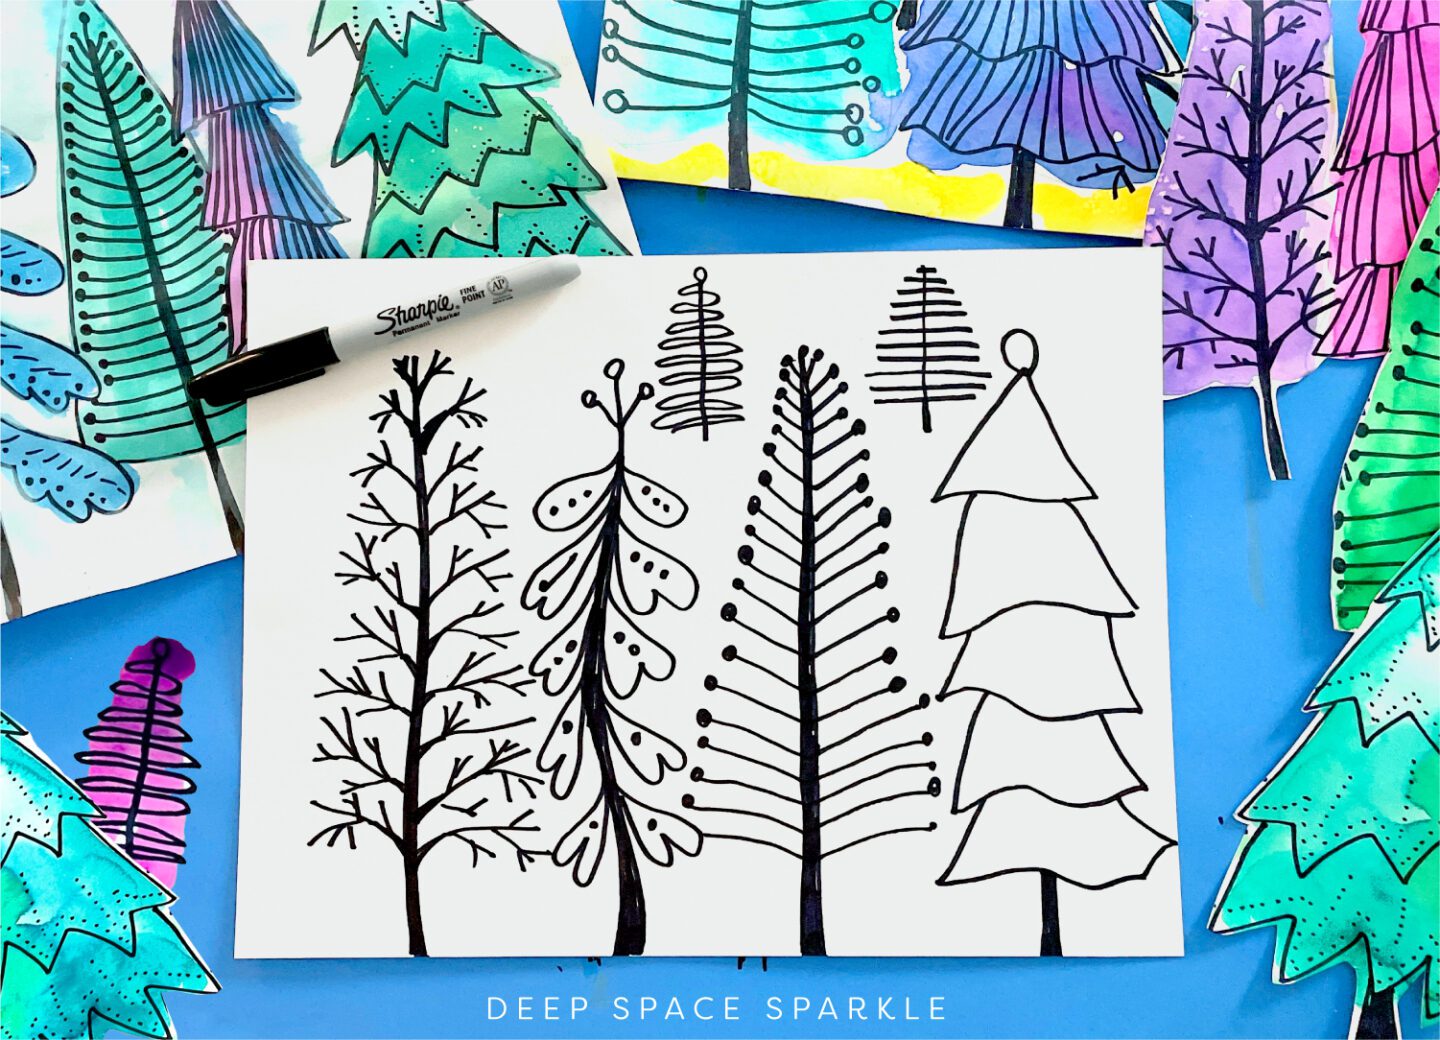 Third grade art projects include this white piece of paper that has the outline of several different style trees in black. Paintings with trees colored using watercolor are shown in the background 